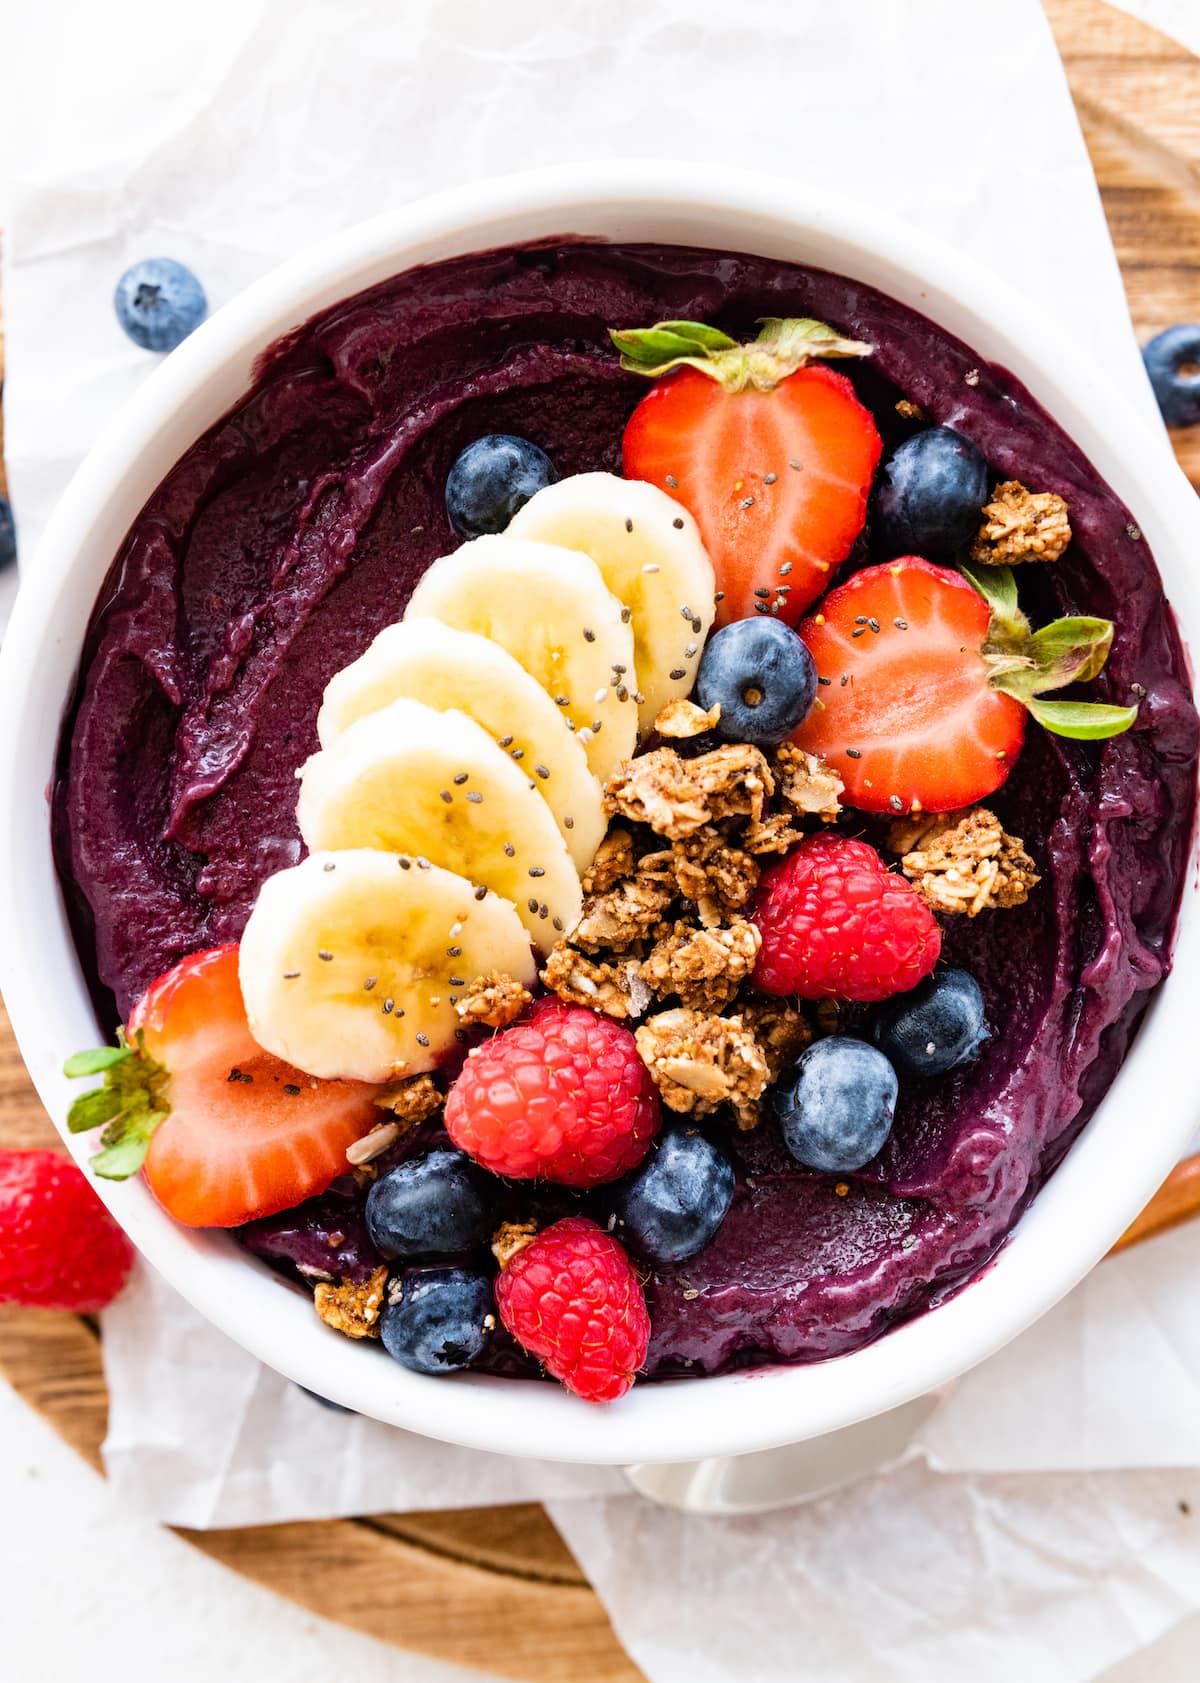 An acai bowl topped with fresh berries, sliced banana, and granola.